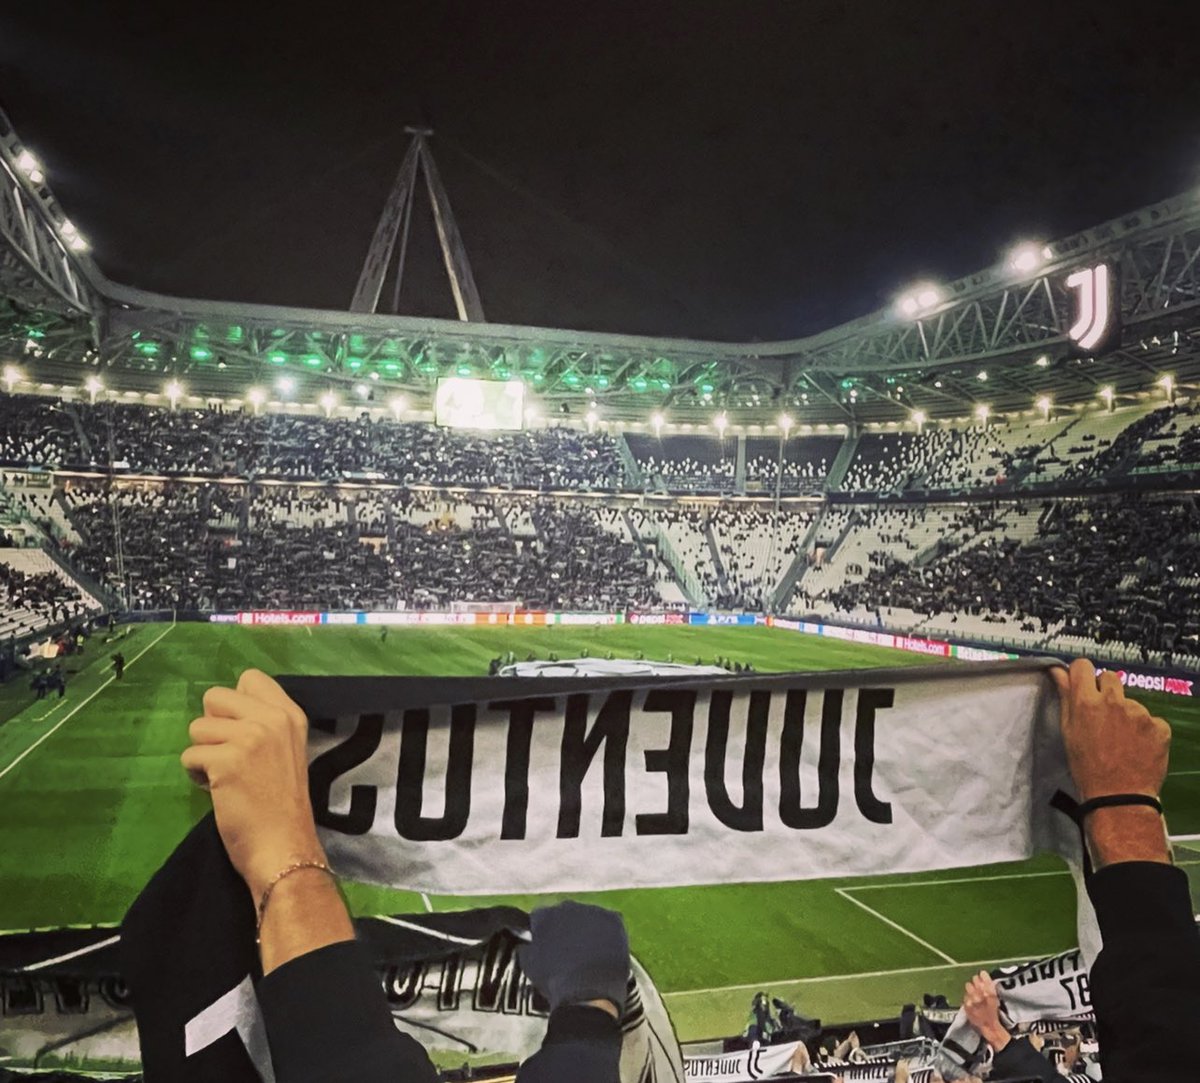 JUV-VER 6Feb
JUV-SAS 10Feb
JUV-TOR 18Feb
Always with you. See you at the Stadium ⚫️⚪️ FREE BEER/DRINK as always at the international pre-game party 🍻🍹 #YourFamilyInTurin